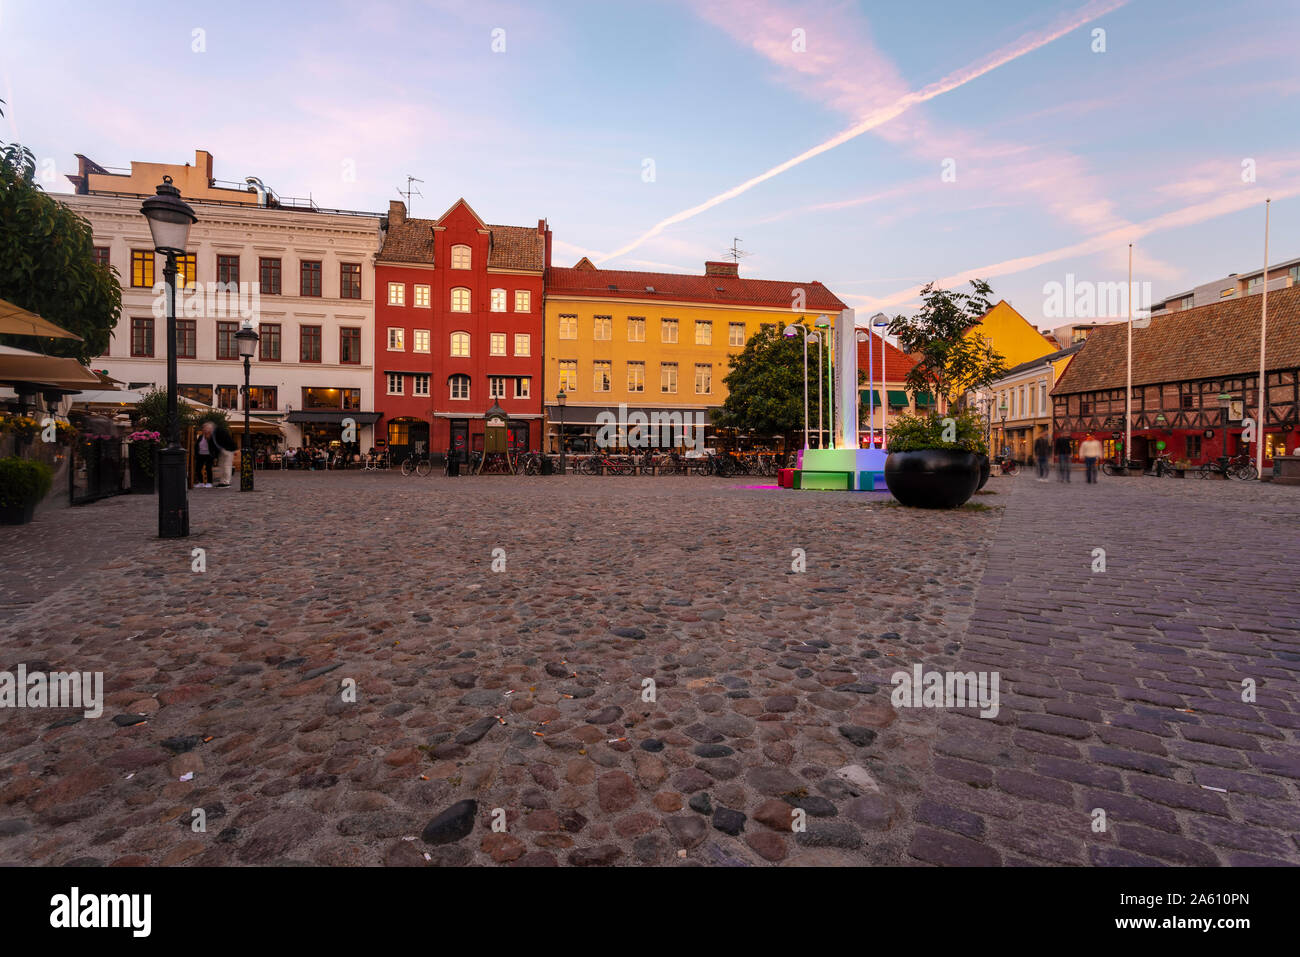 Buildings at city square against sky during sunset in Malmo, Sweden Stock Photo